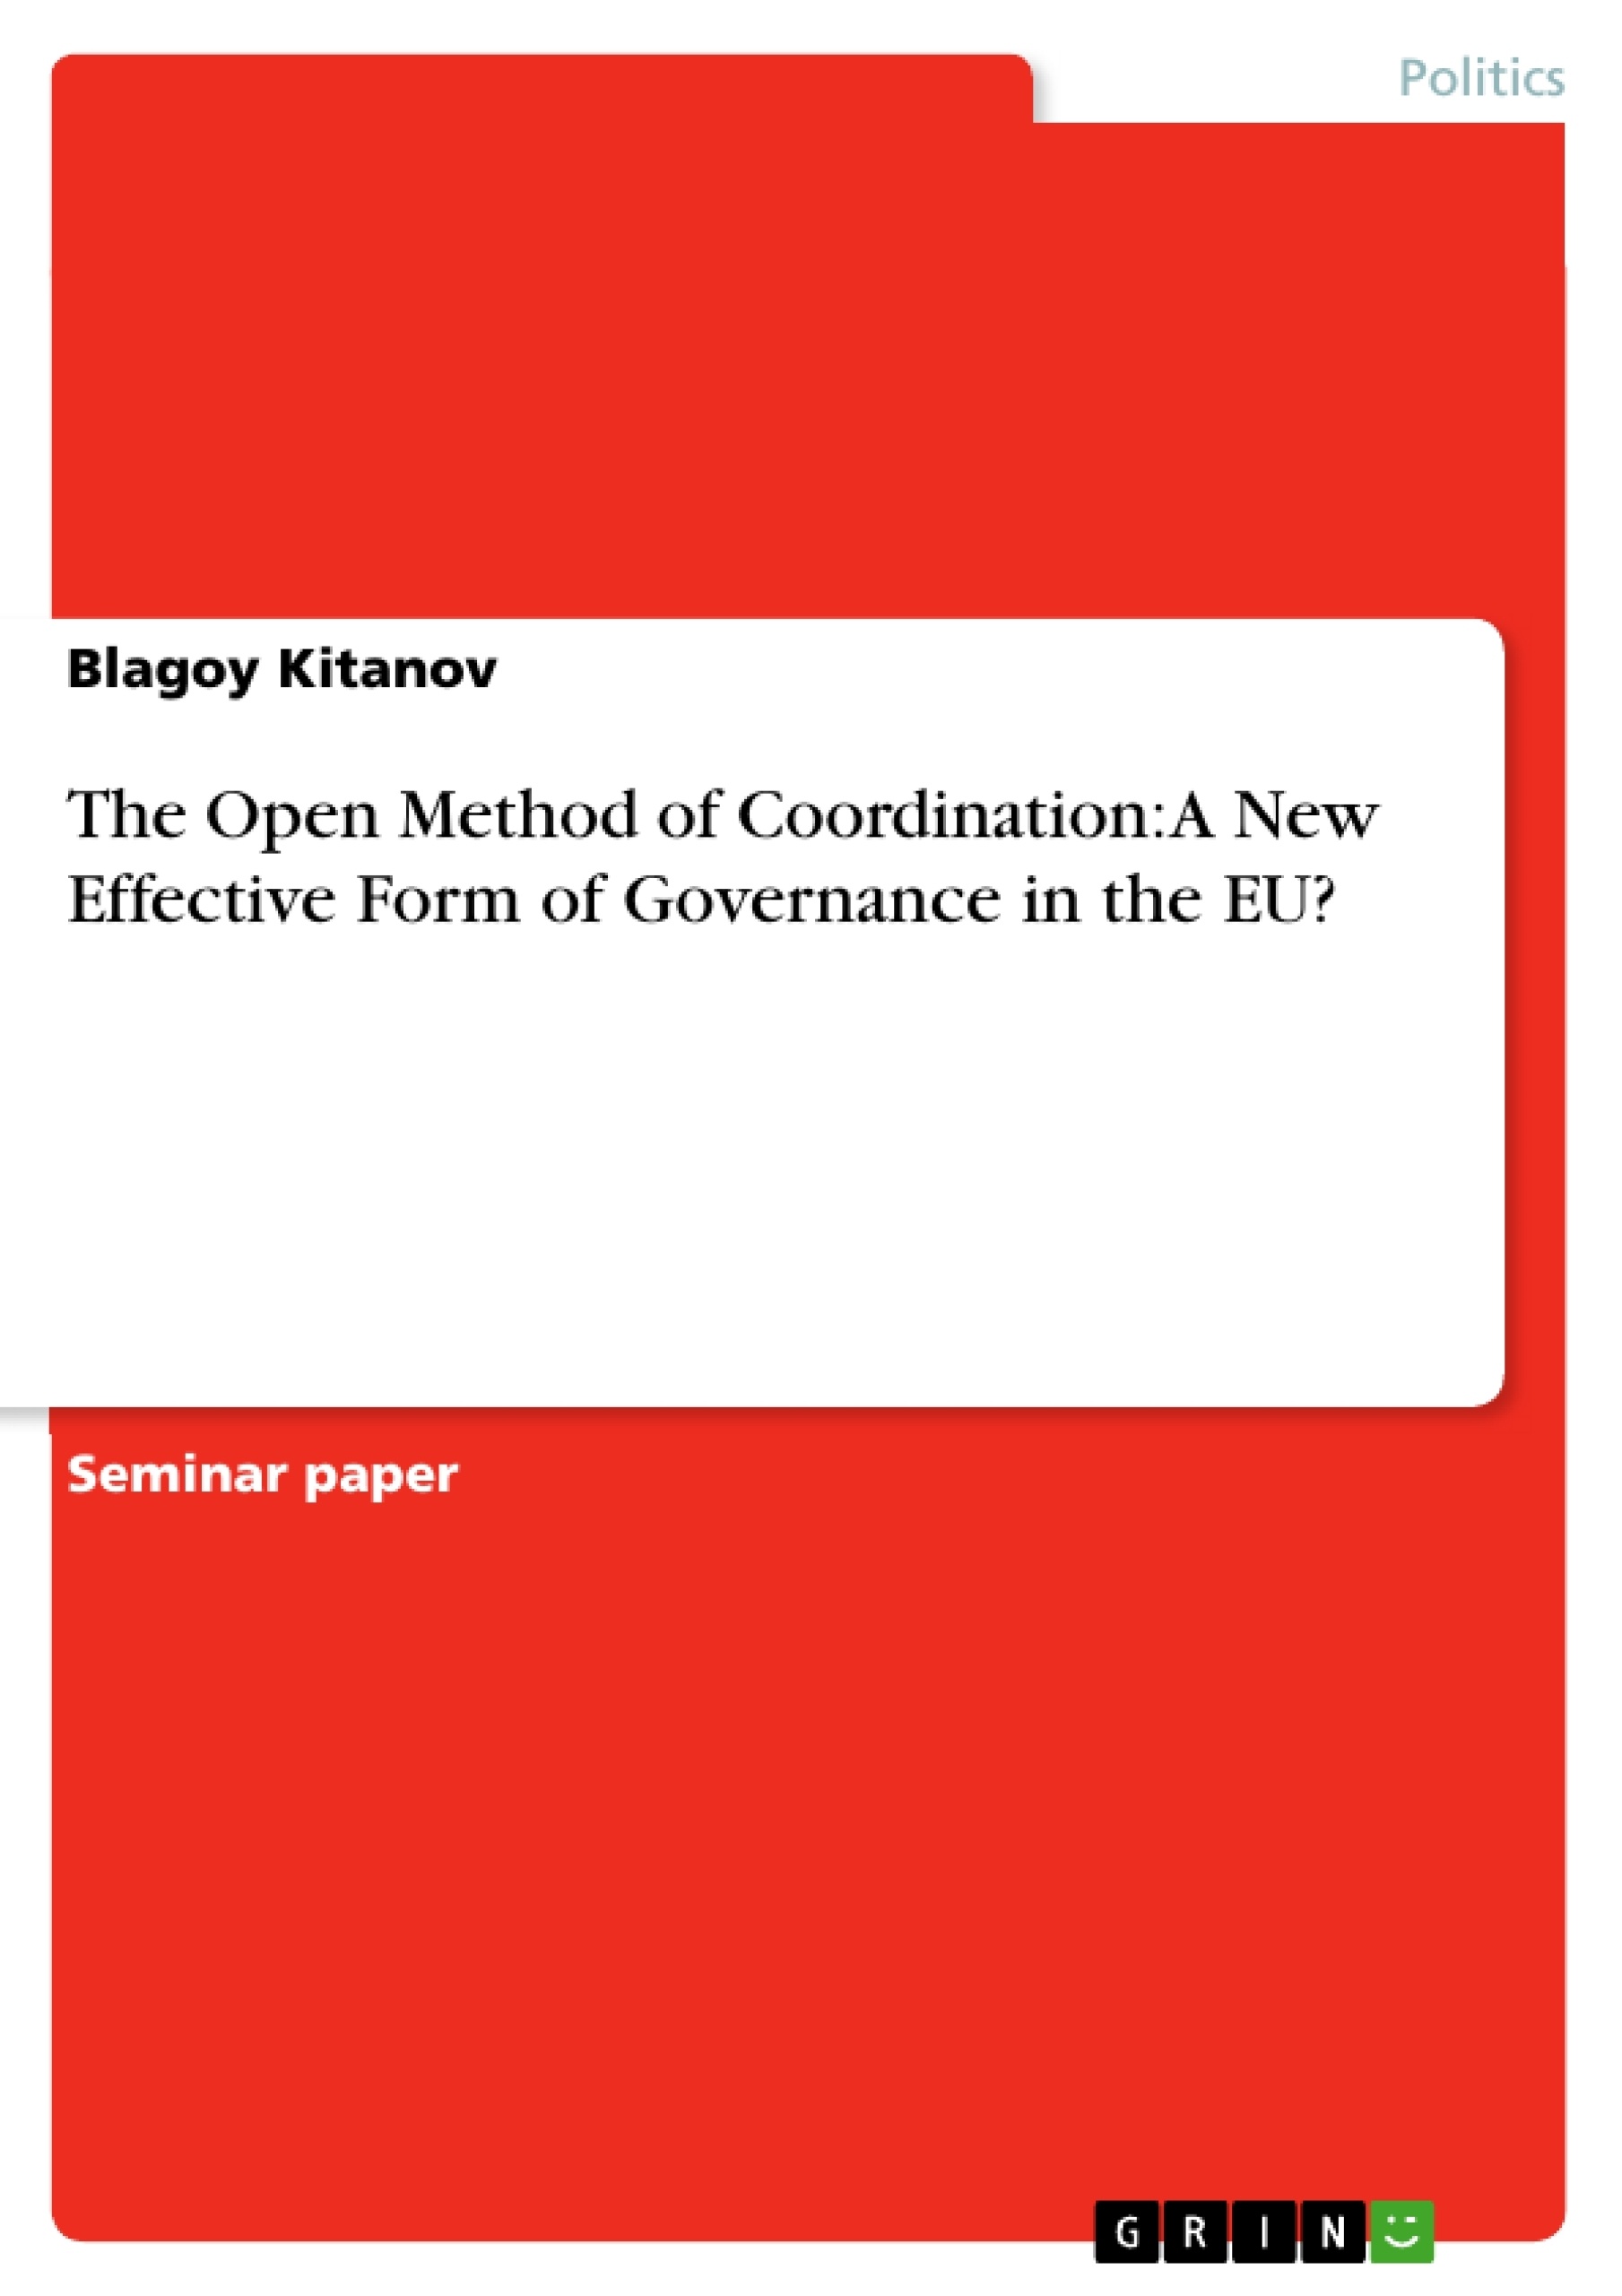 Titre: The Open Method of Coordination: A New Effective Form of Governance in the EU?